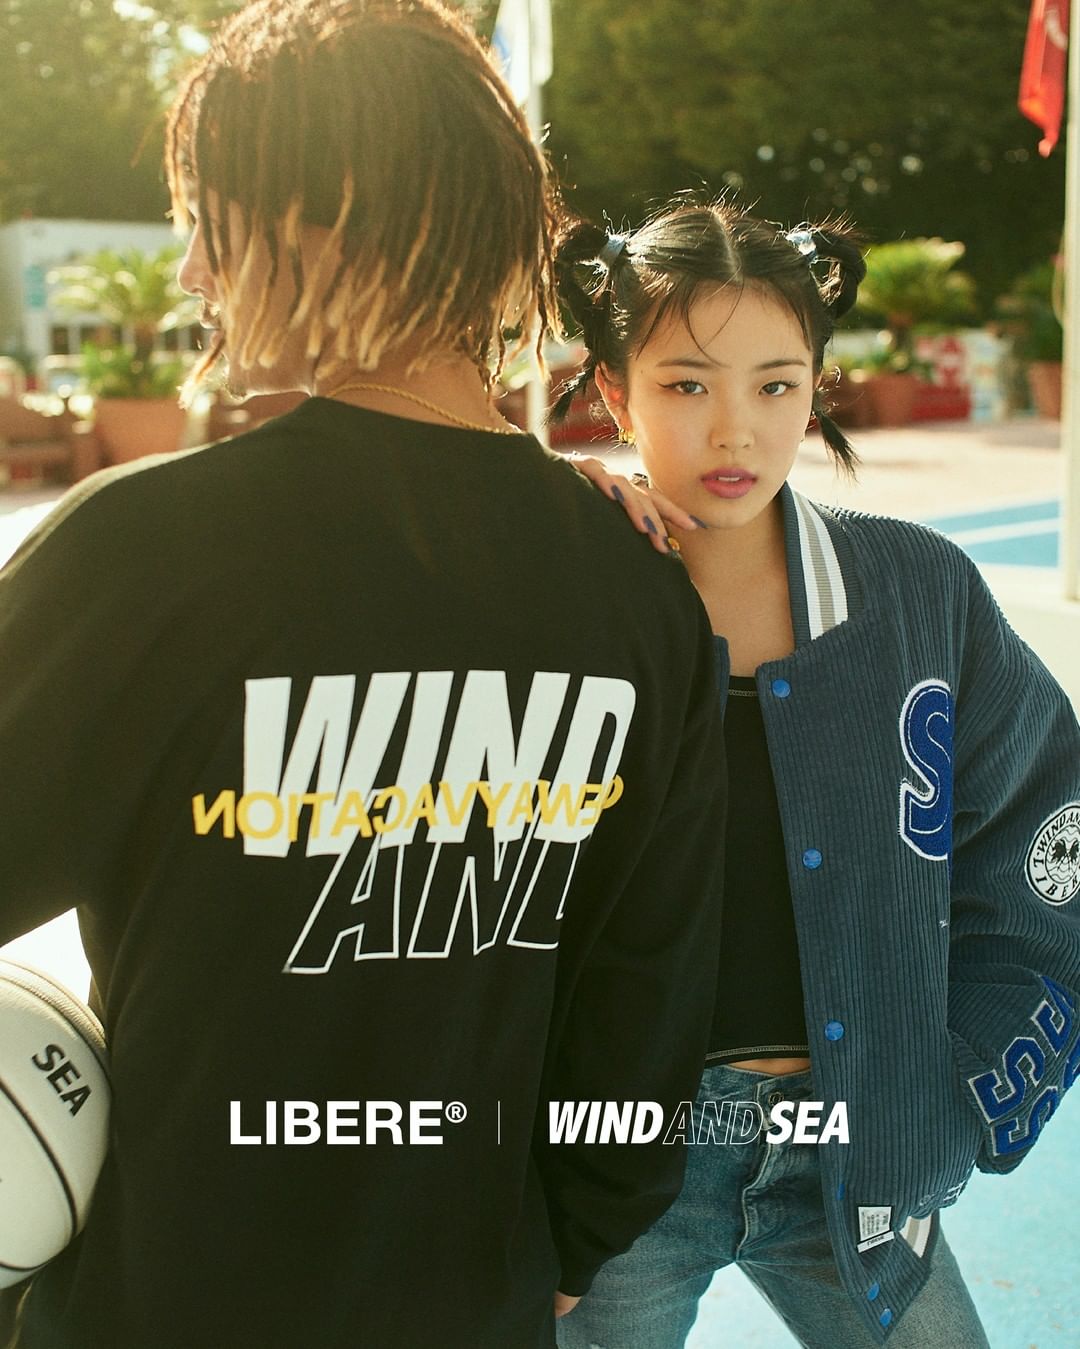 LIBERE x WIND AND SEA 联名系列发布在即